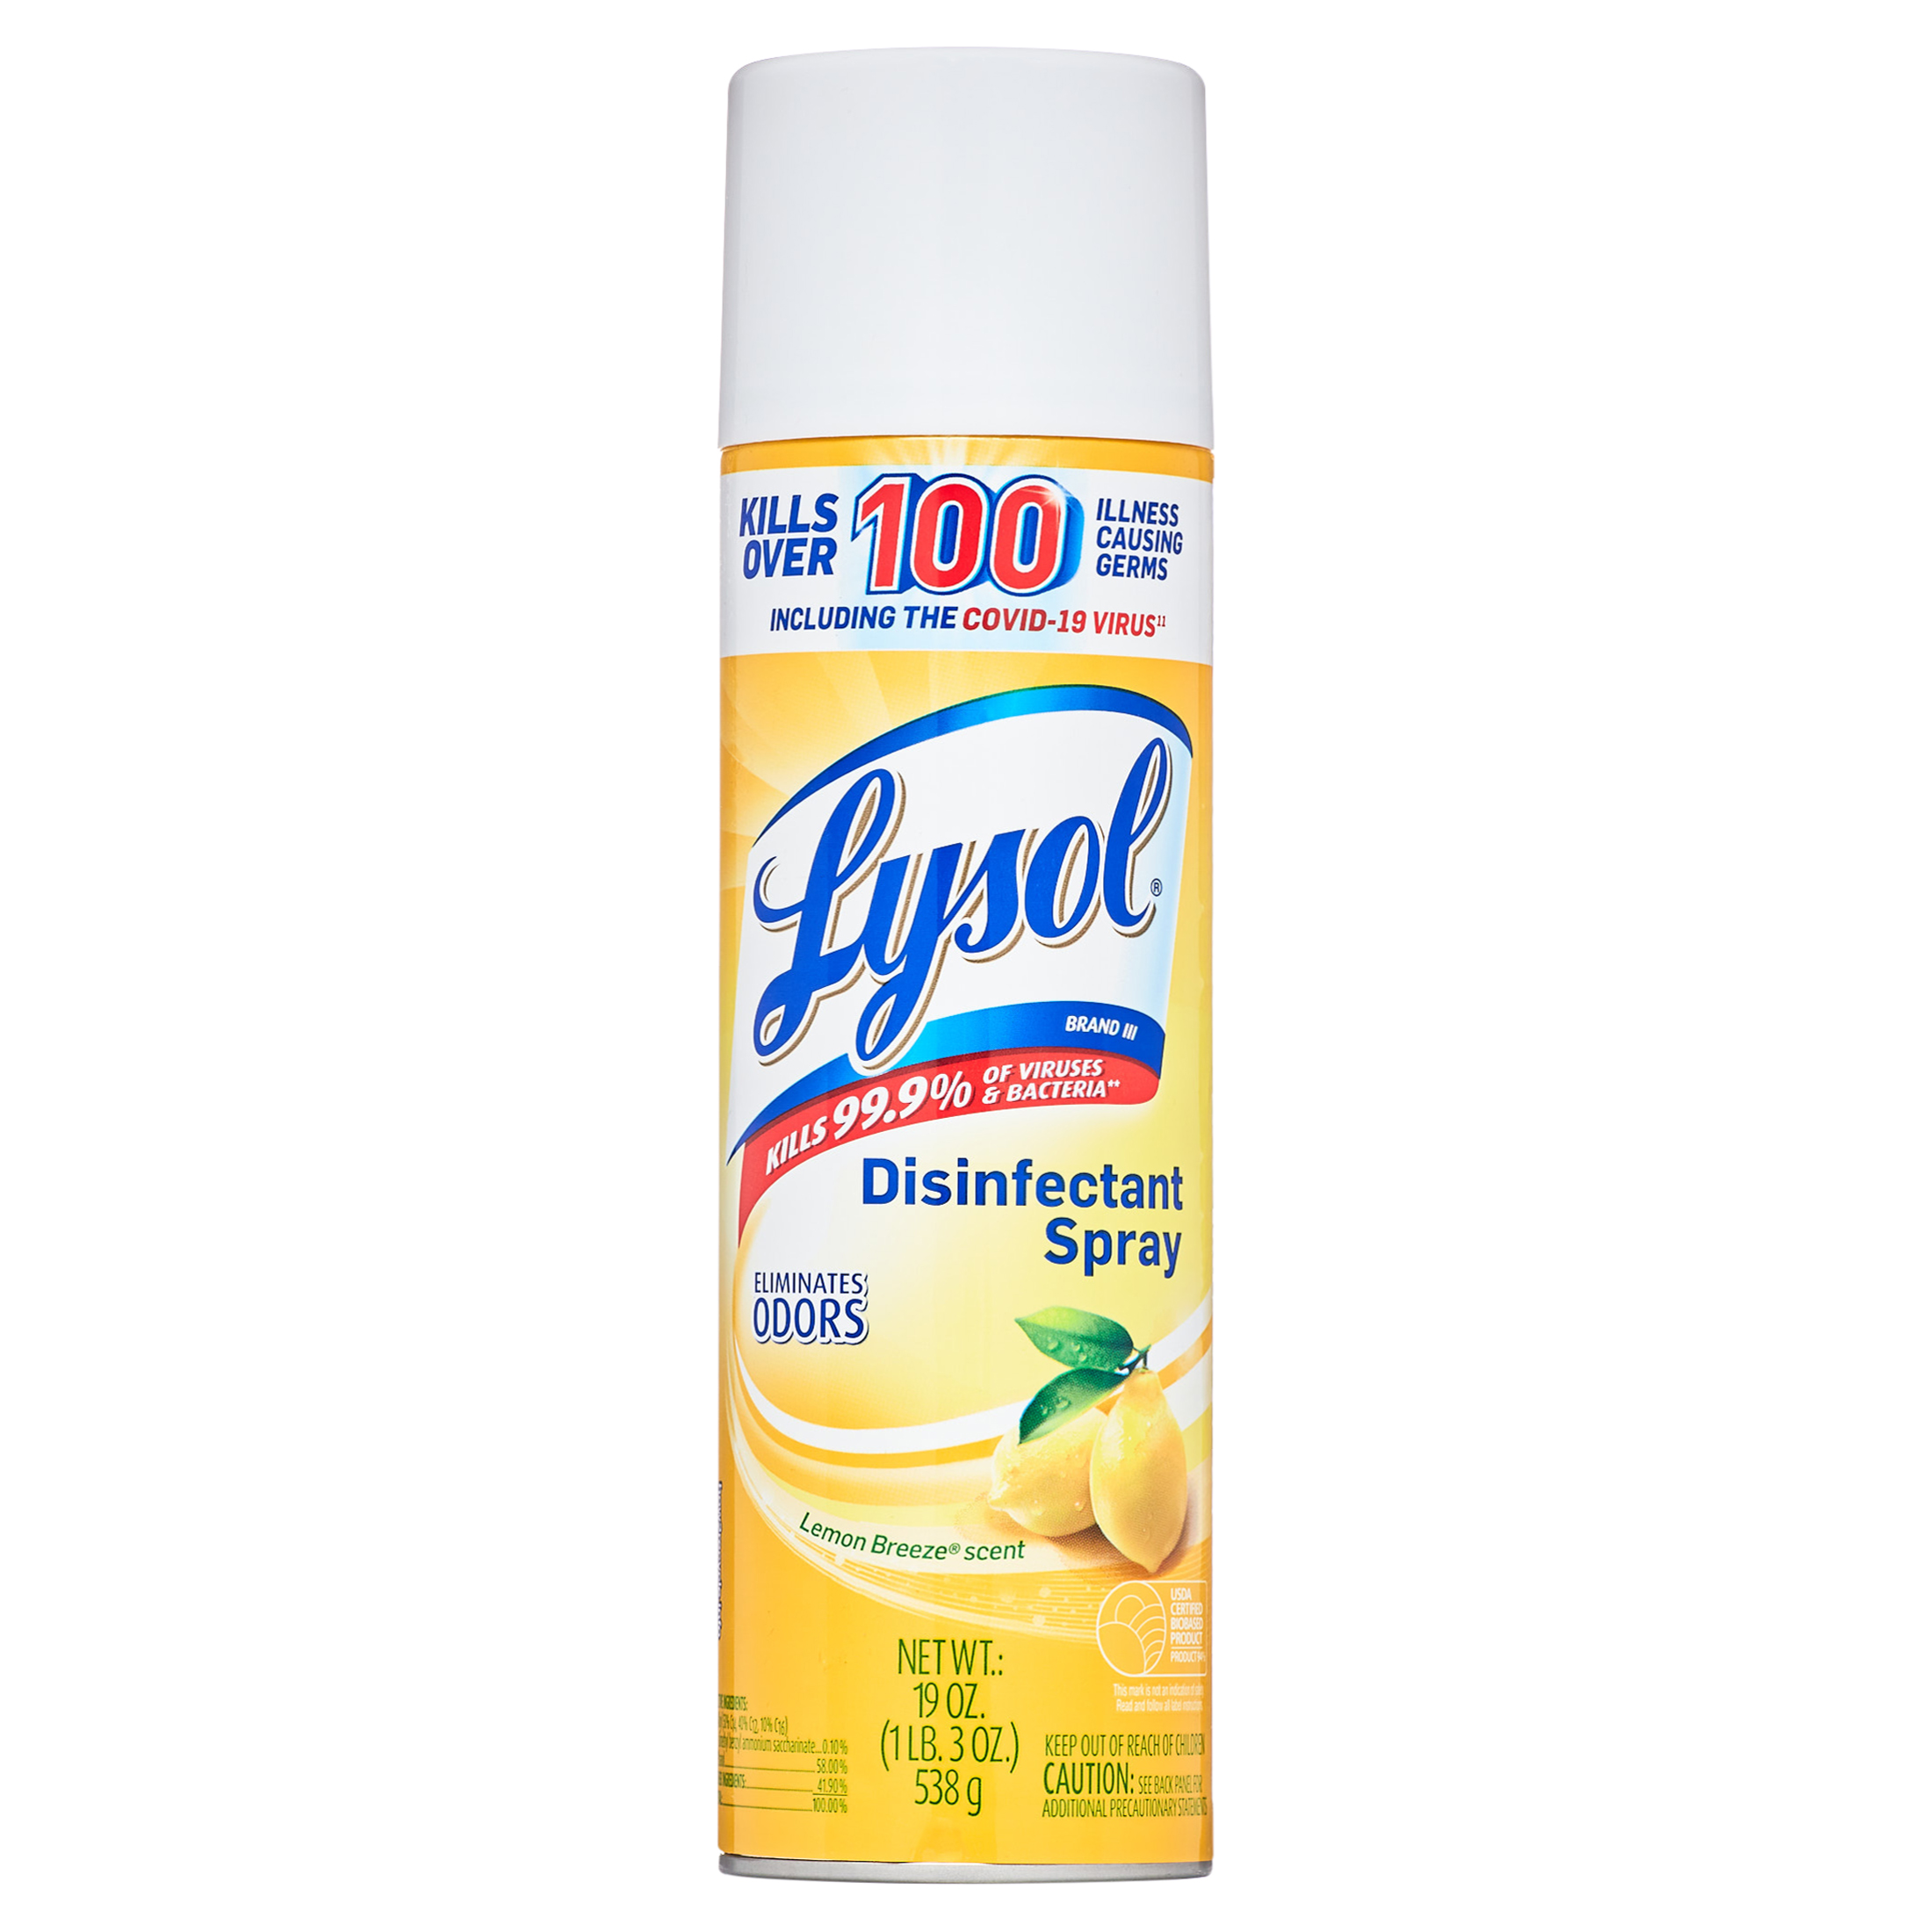 Lysol Disinfectant Spray, Lemon Breeze, 19oz, Tested and Proven to Kill COVID-19 Virus, Packaging May Vary​ - image 1 of 9